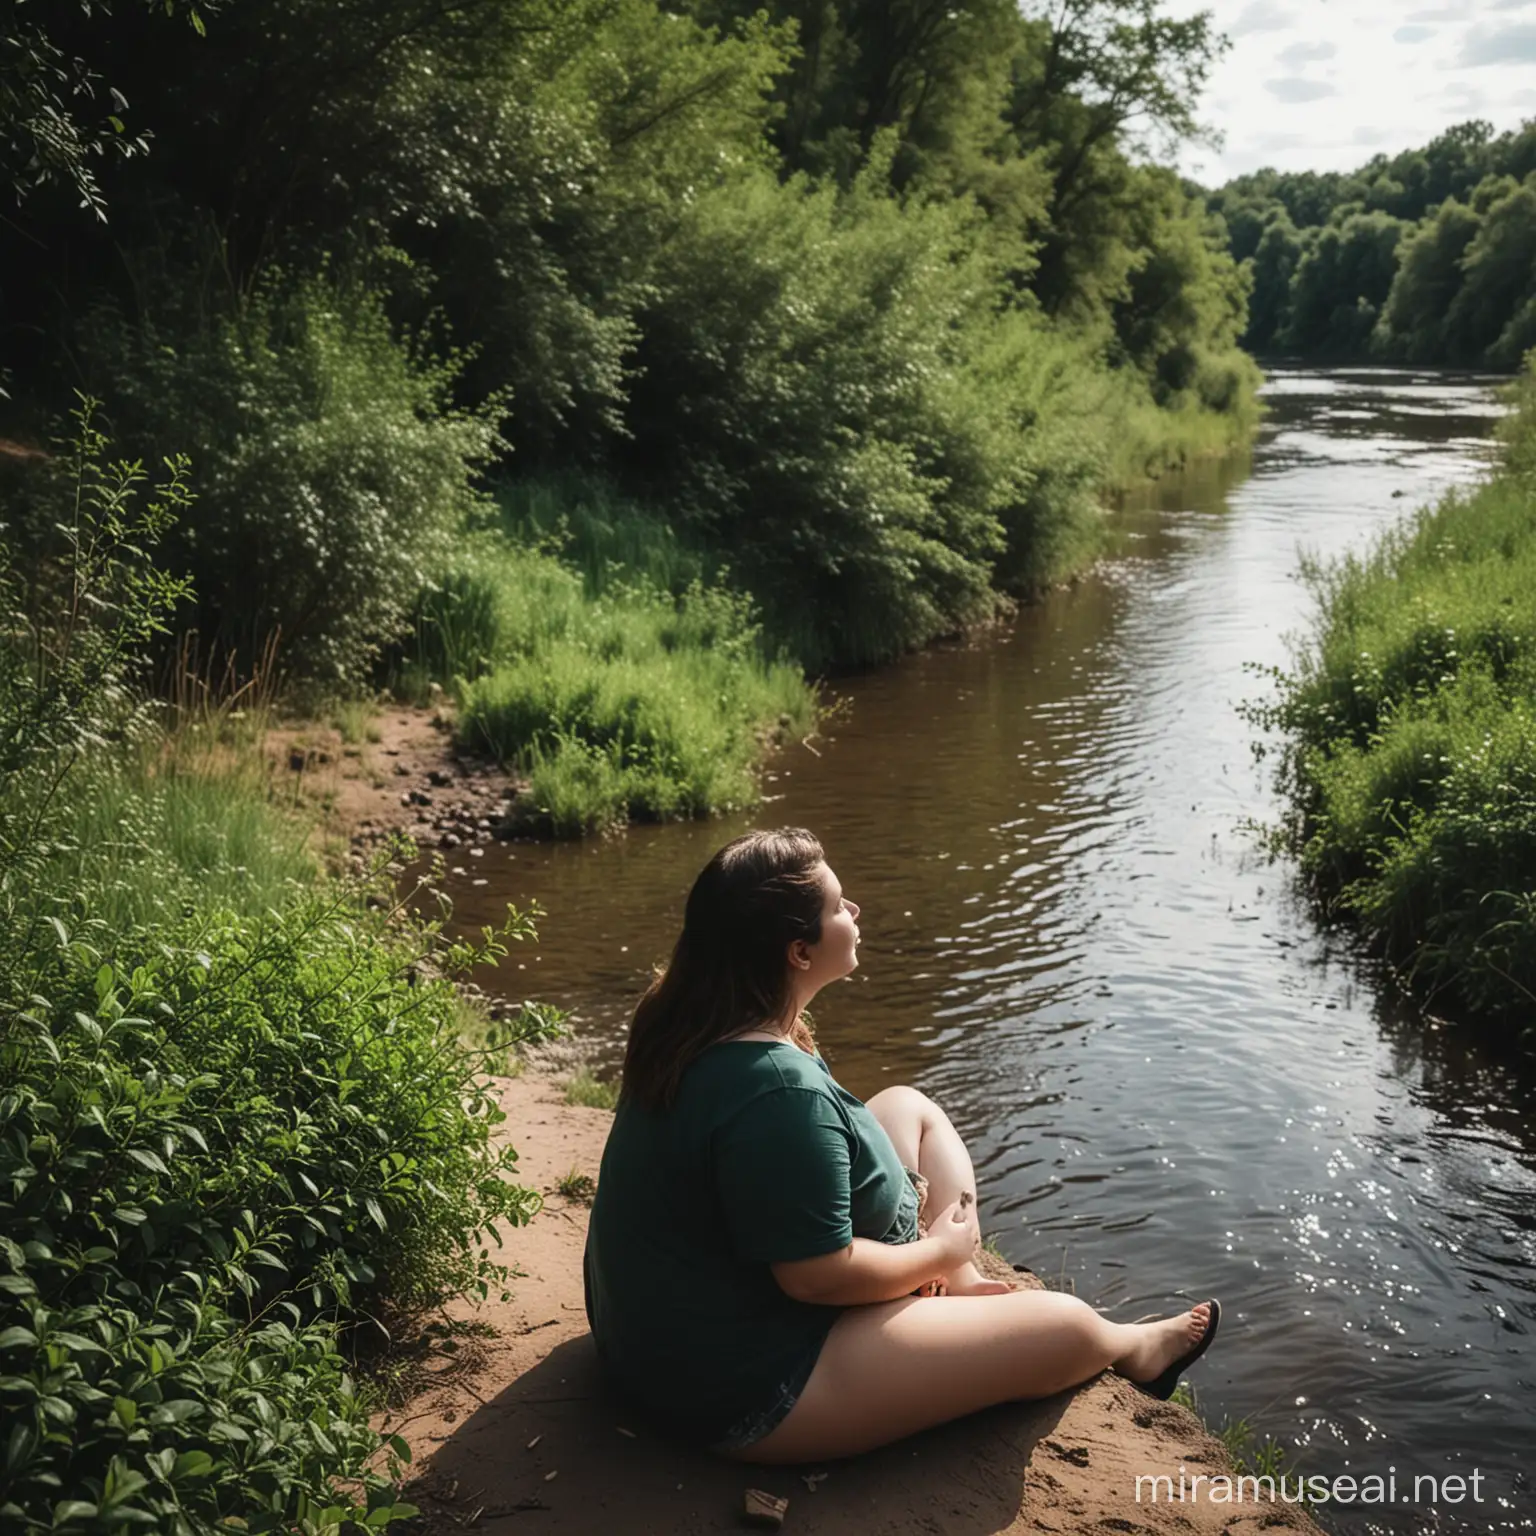 Chubby Girl Sitting by the Riverbank with Dark Green Bushes Background